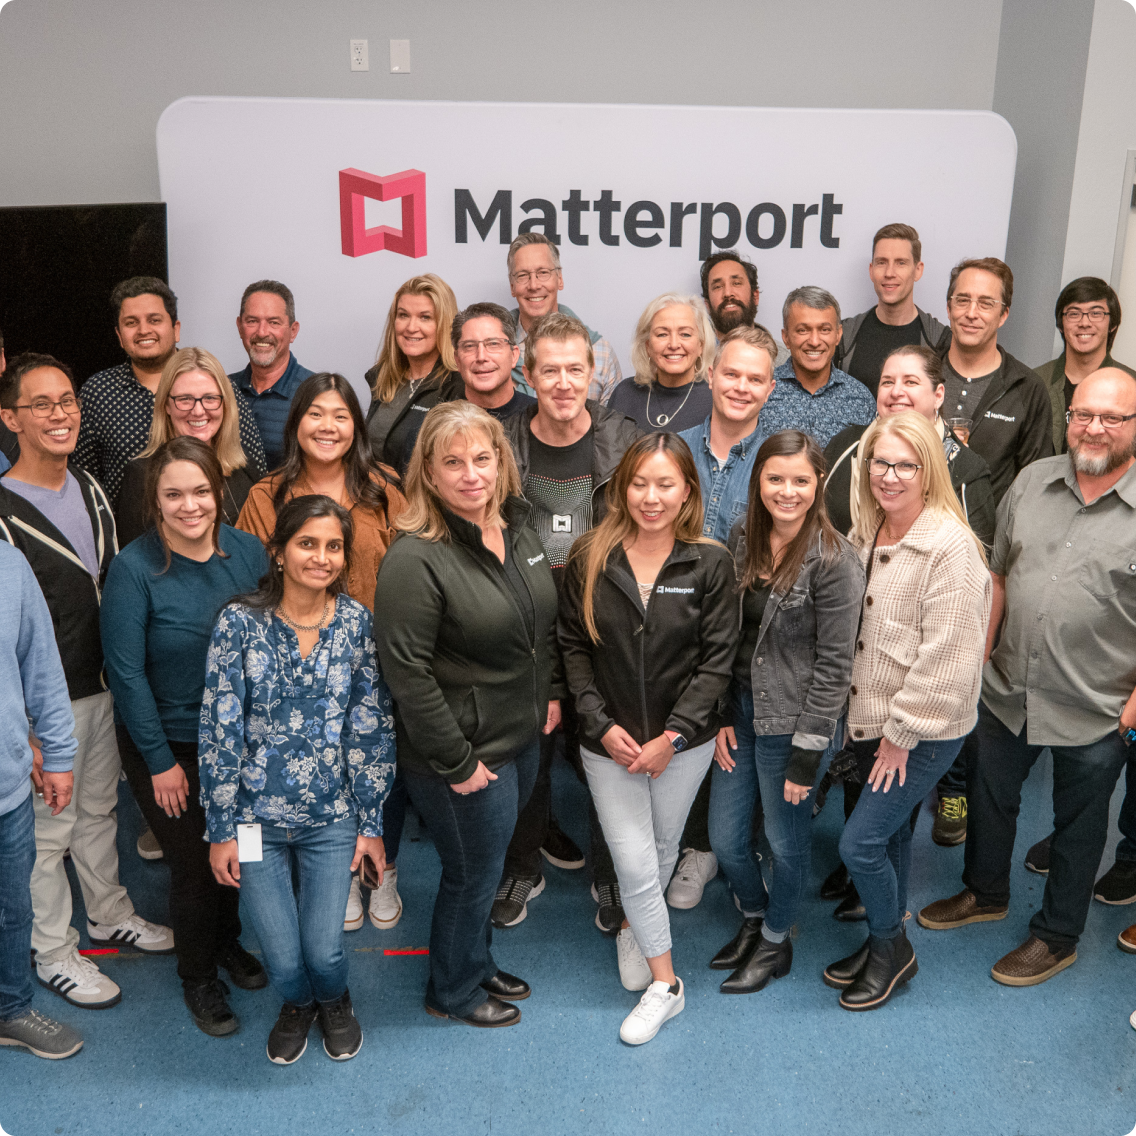 A group photo of Matterport employees